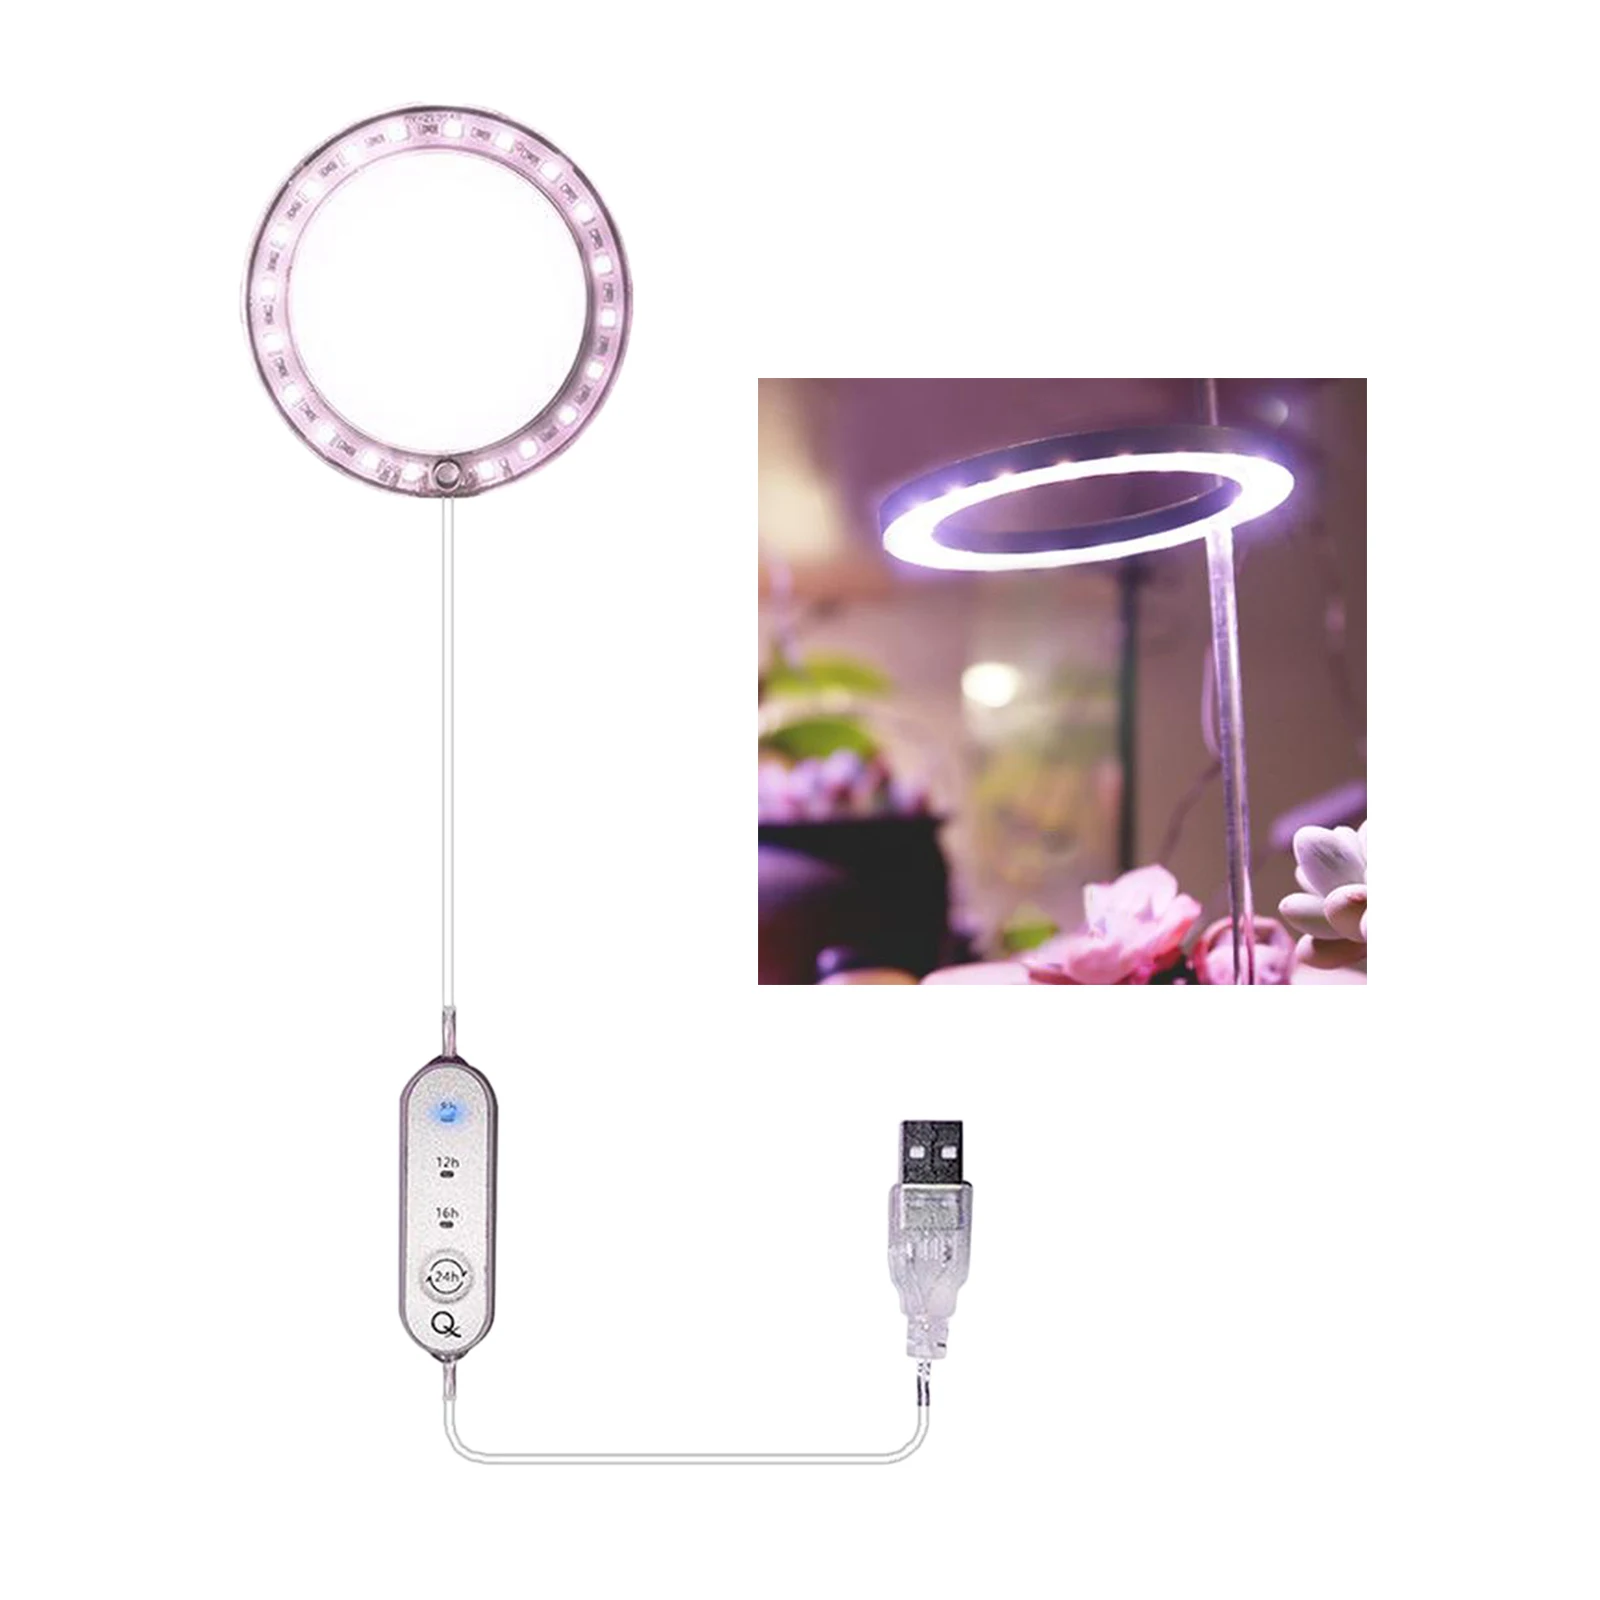 Full Spectrum Grow Light Indoor Desktop Plant Growth Lamp 20 Beads with Acrylic Rod, Up to 50000hours